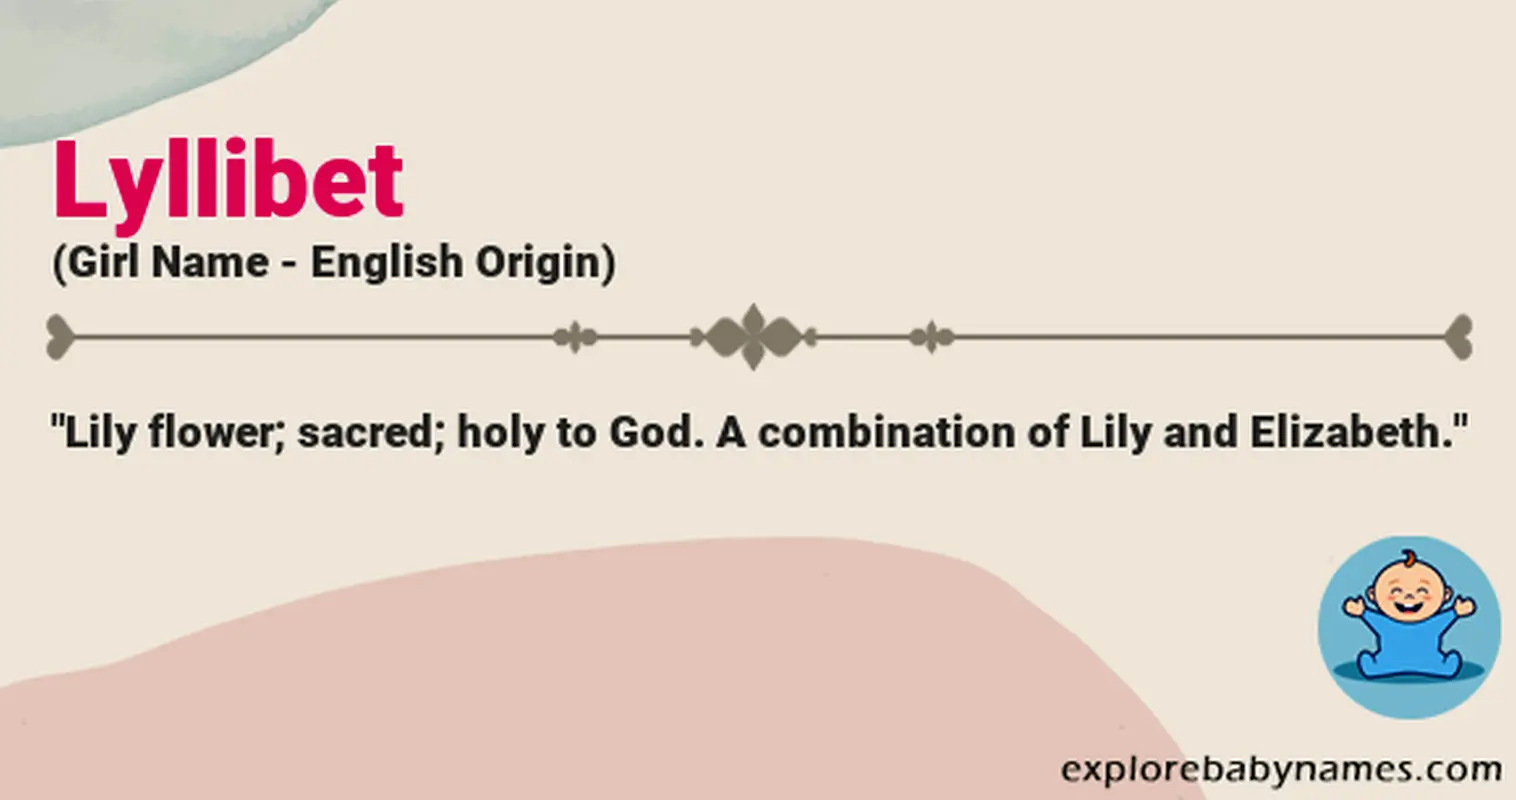 Meaning of Lyllibet